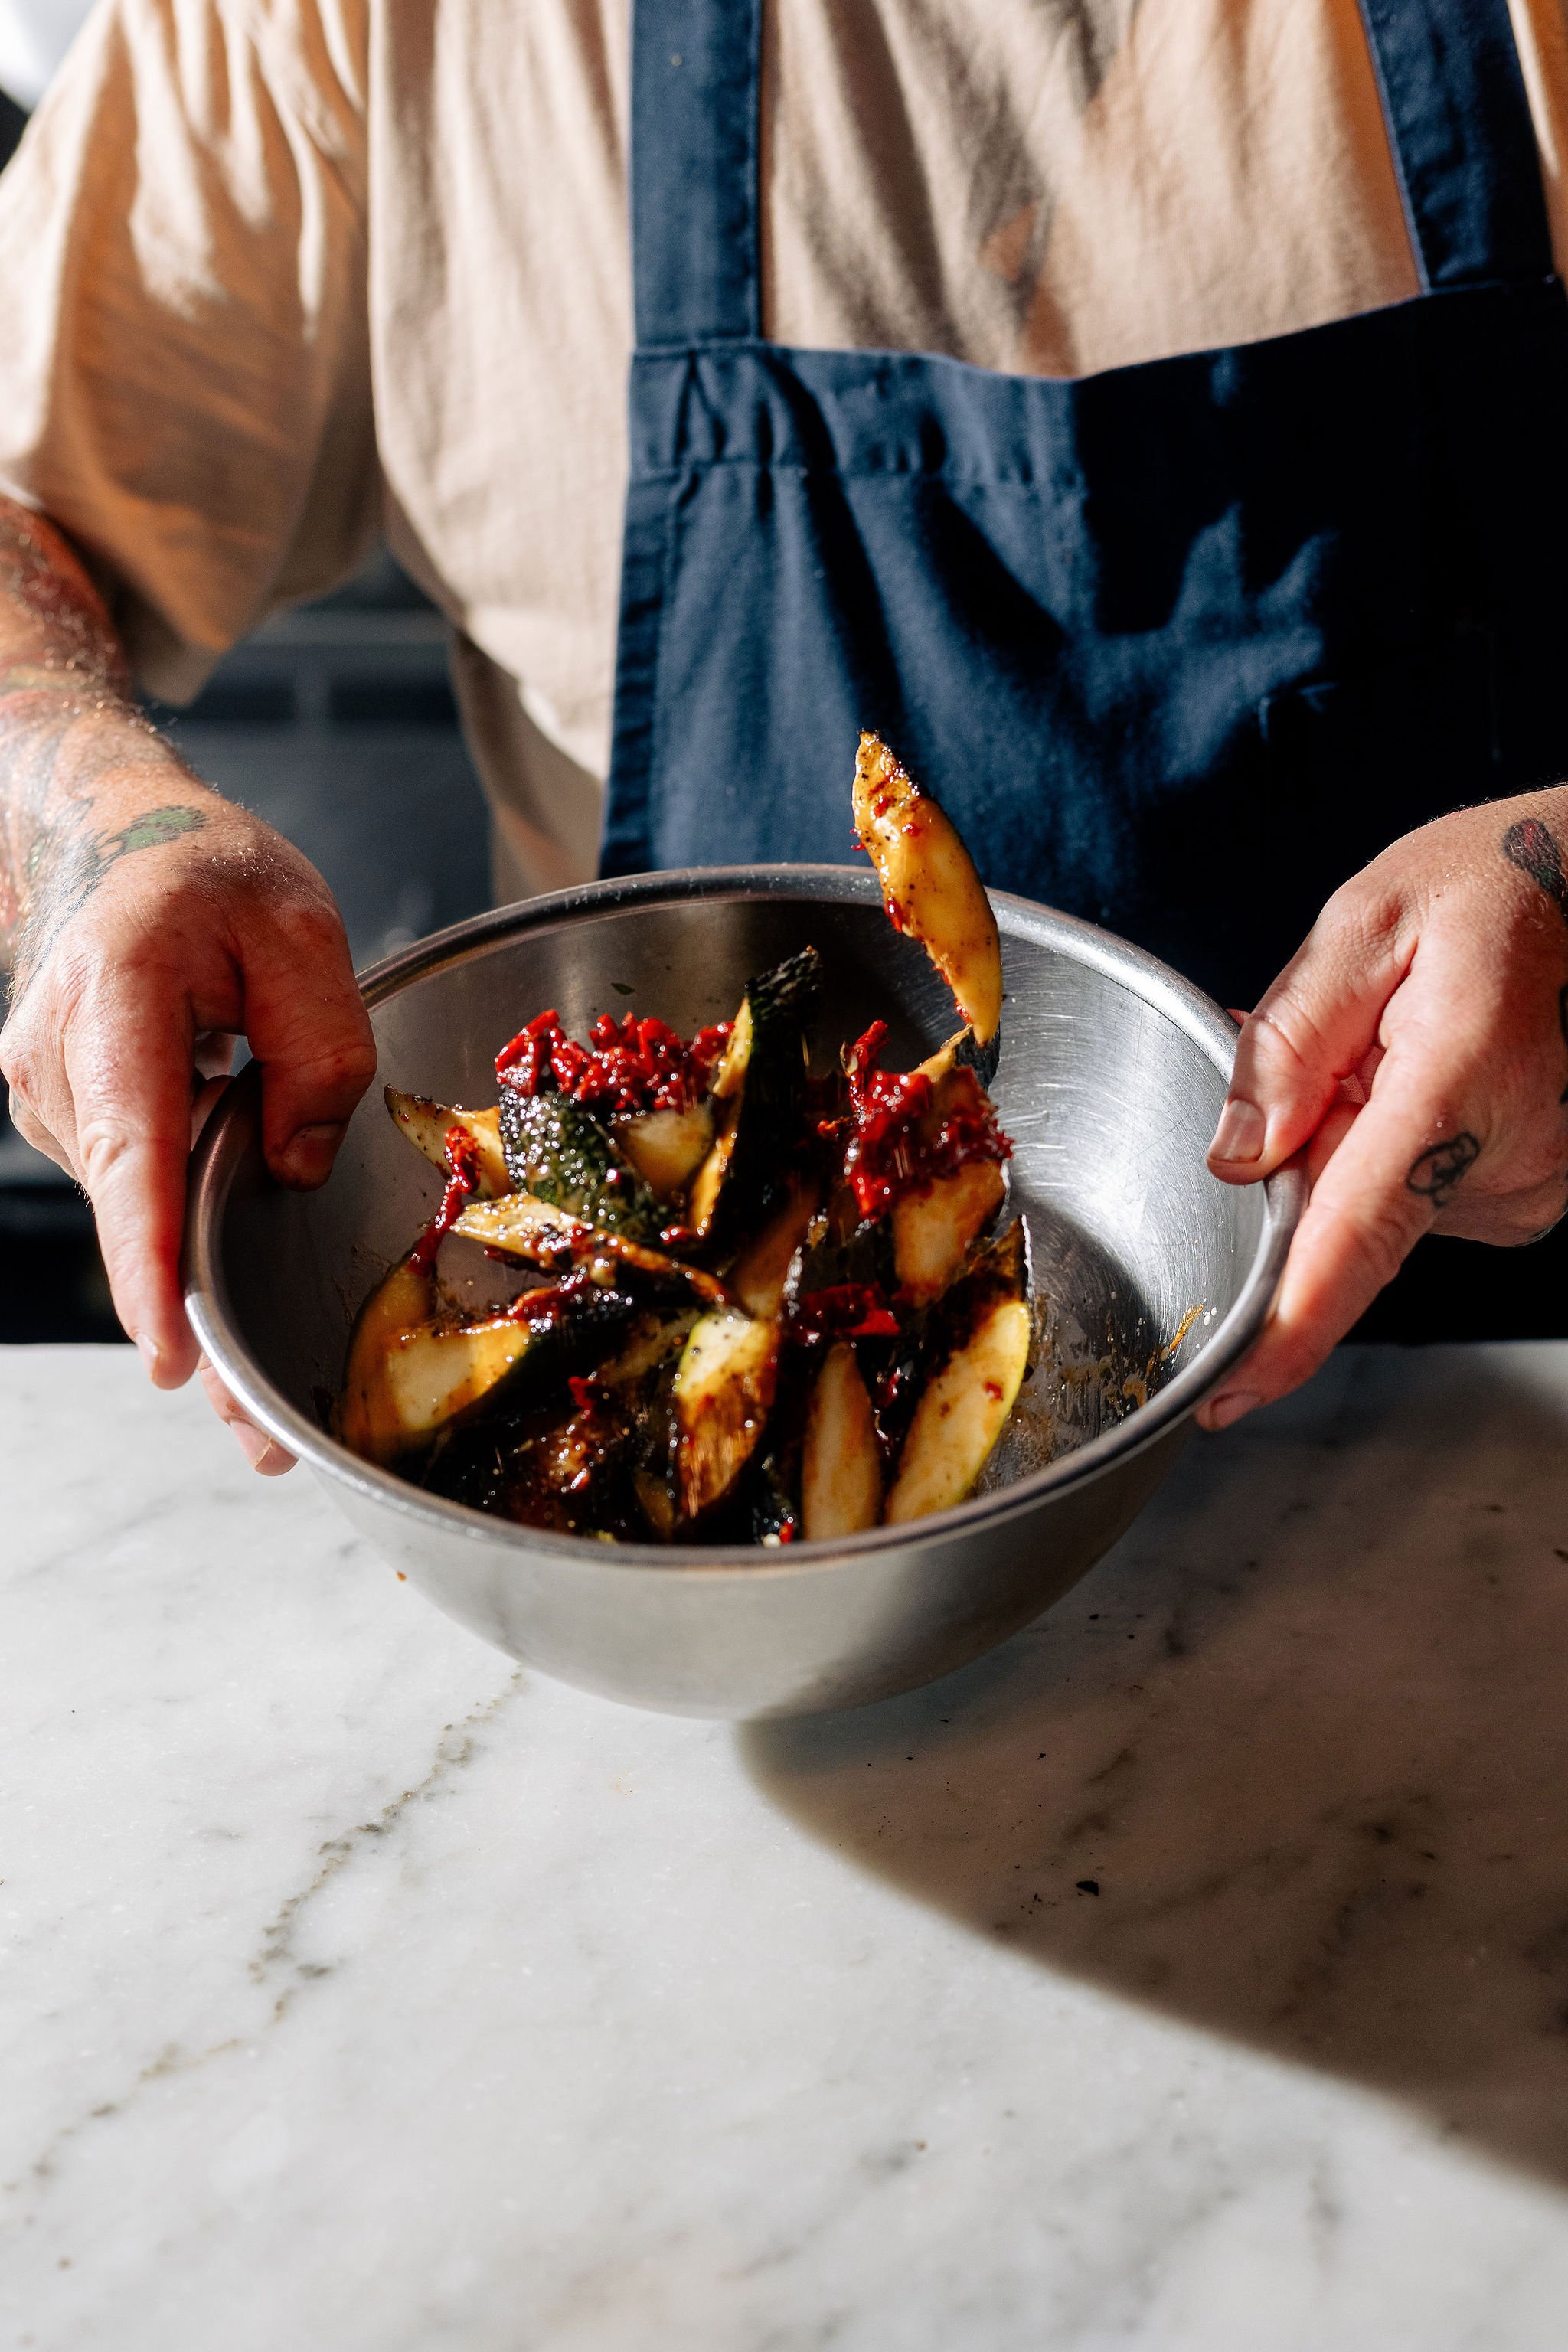 Chef tosses vegetables in bowl - food photographer Canberra